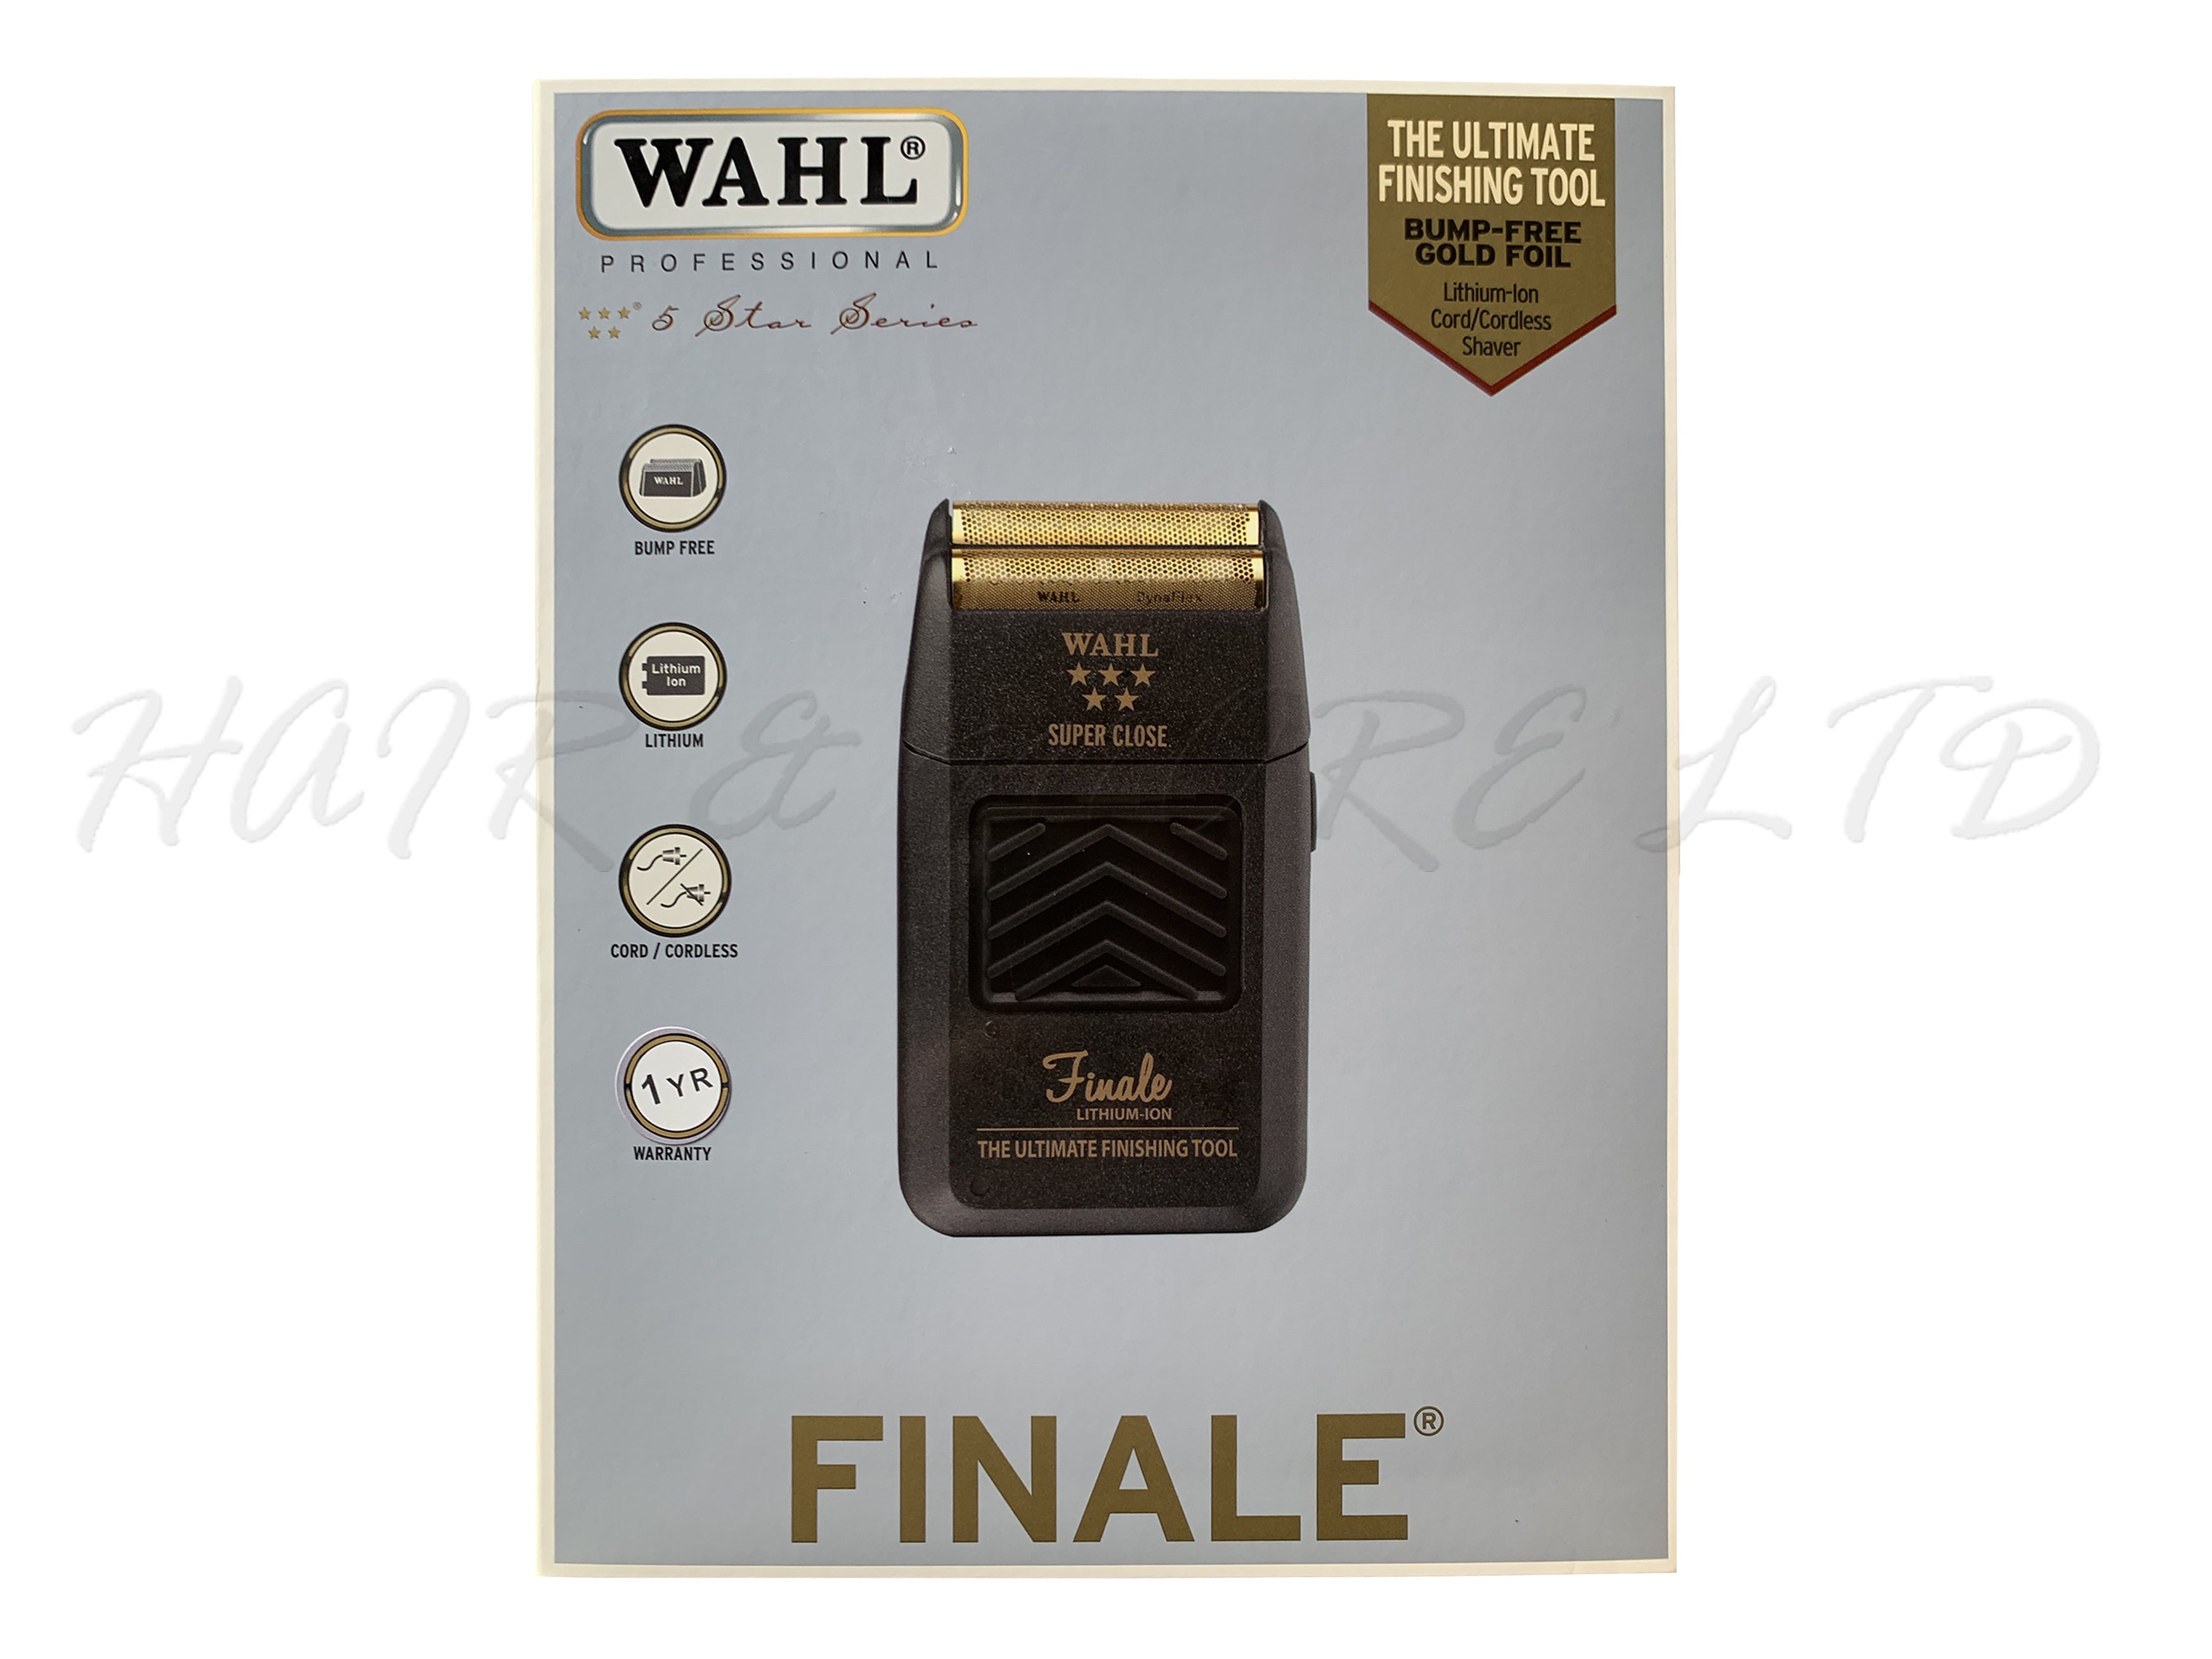 WAHL Professional 5 Star Series, Finale Shaver – Hair and More